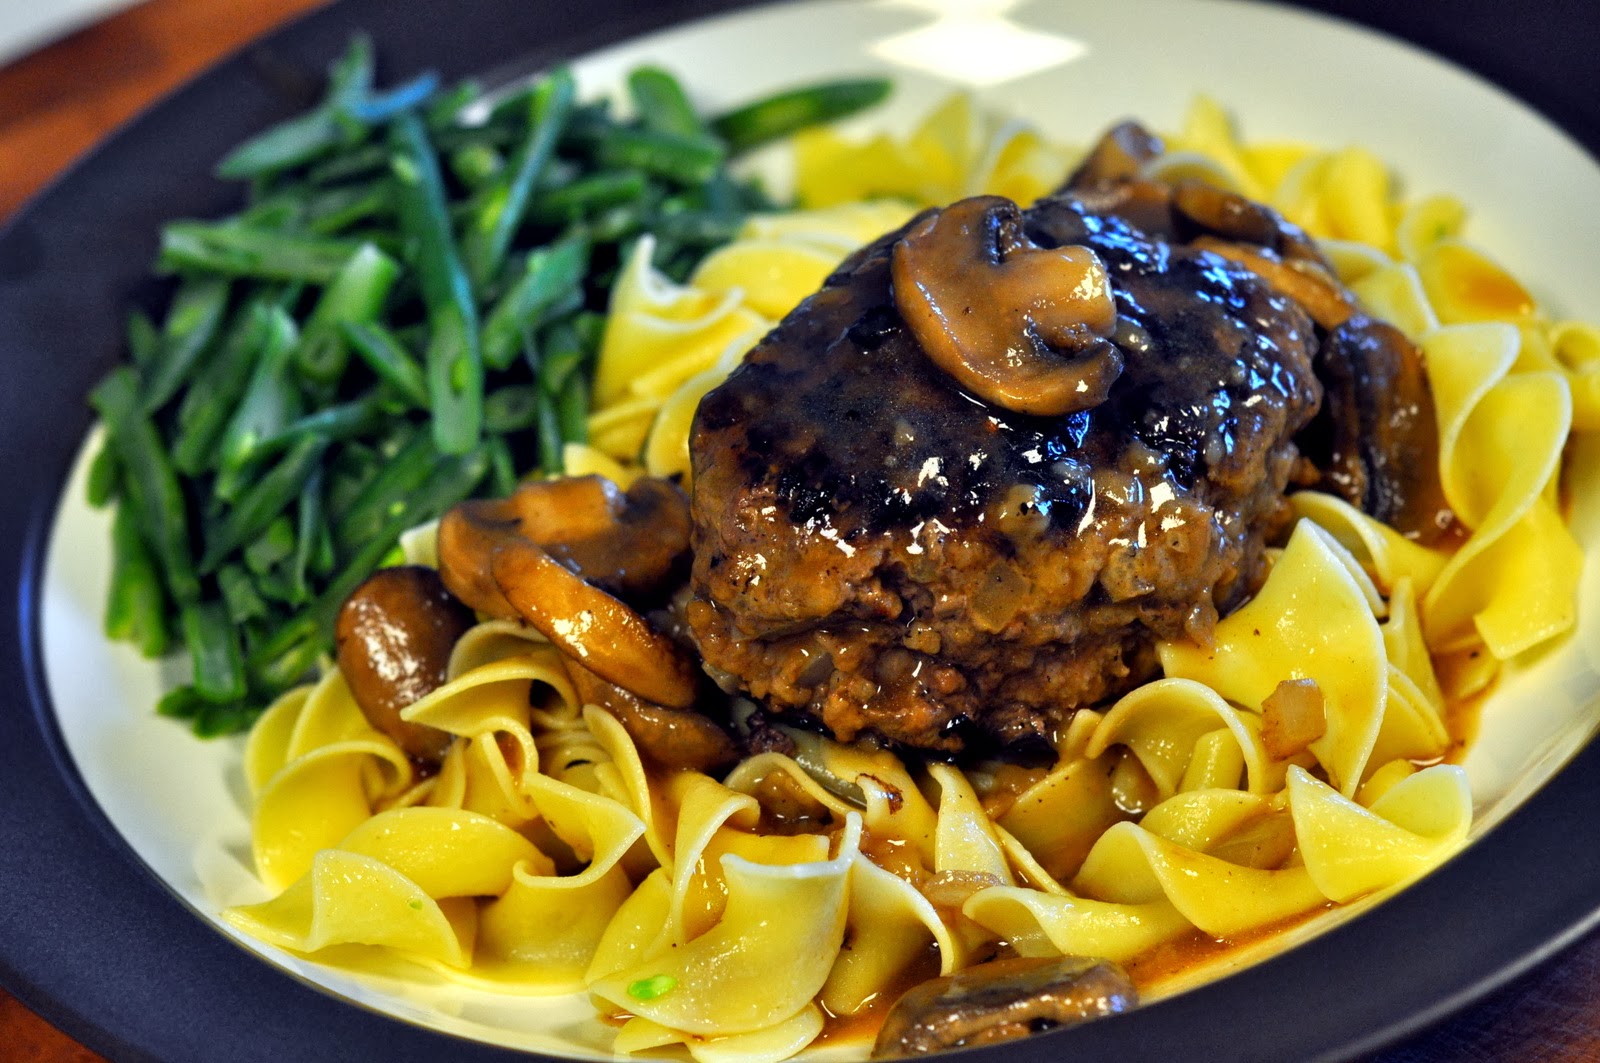 Salisbury steak with mushrooms over wide egg noodles and served with green beans. Food is on a blue and white plate.